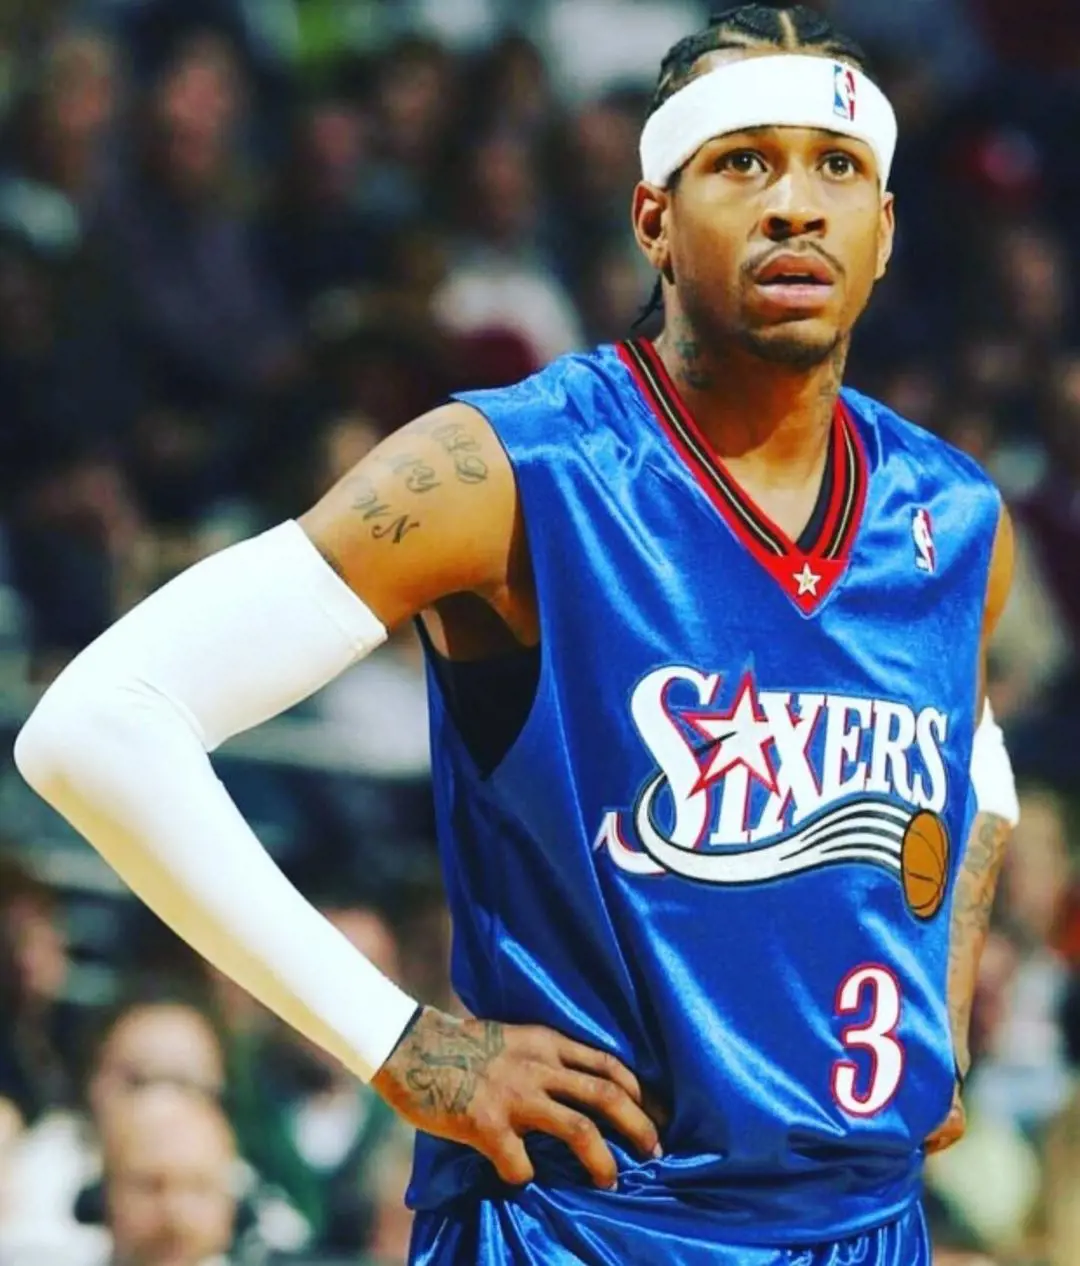 Allen Iverson announced his retirement on October 30, 2013